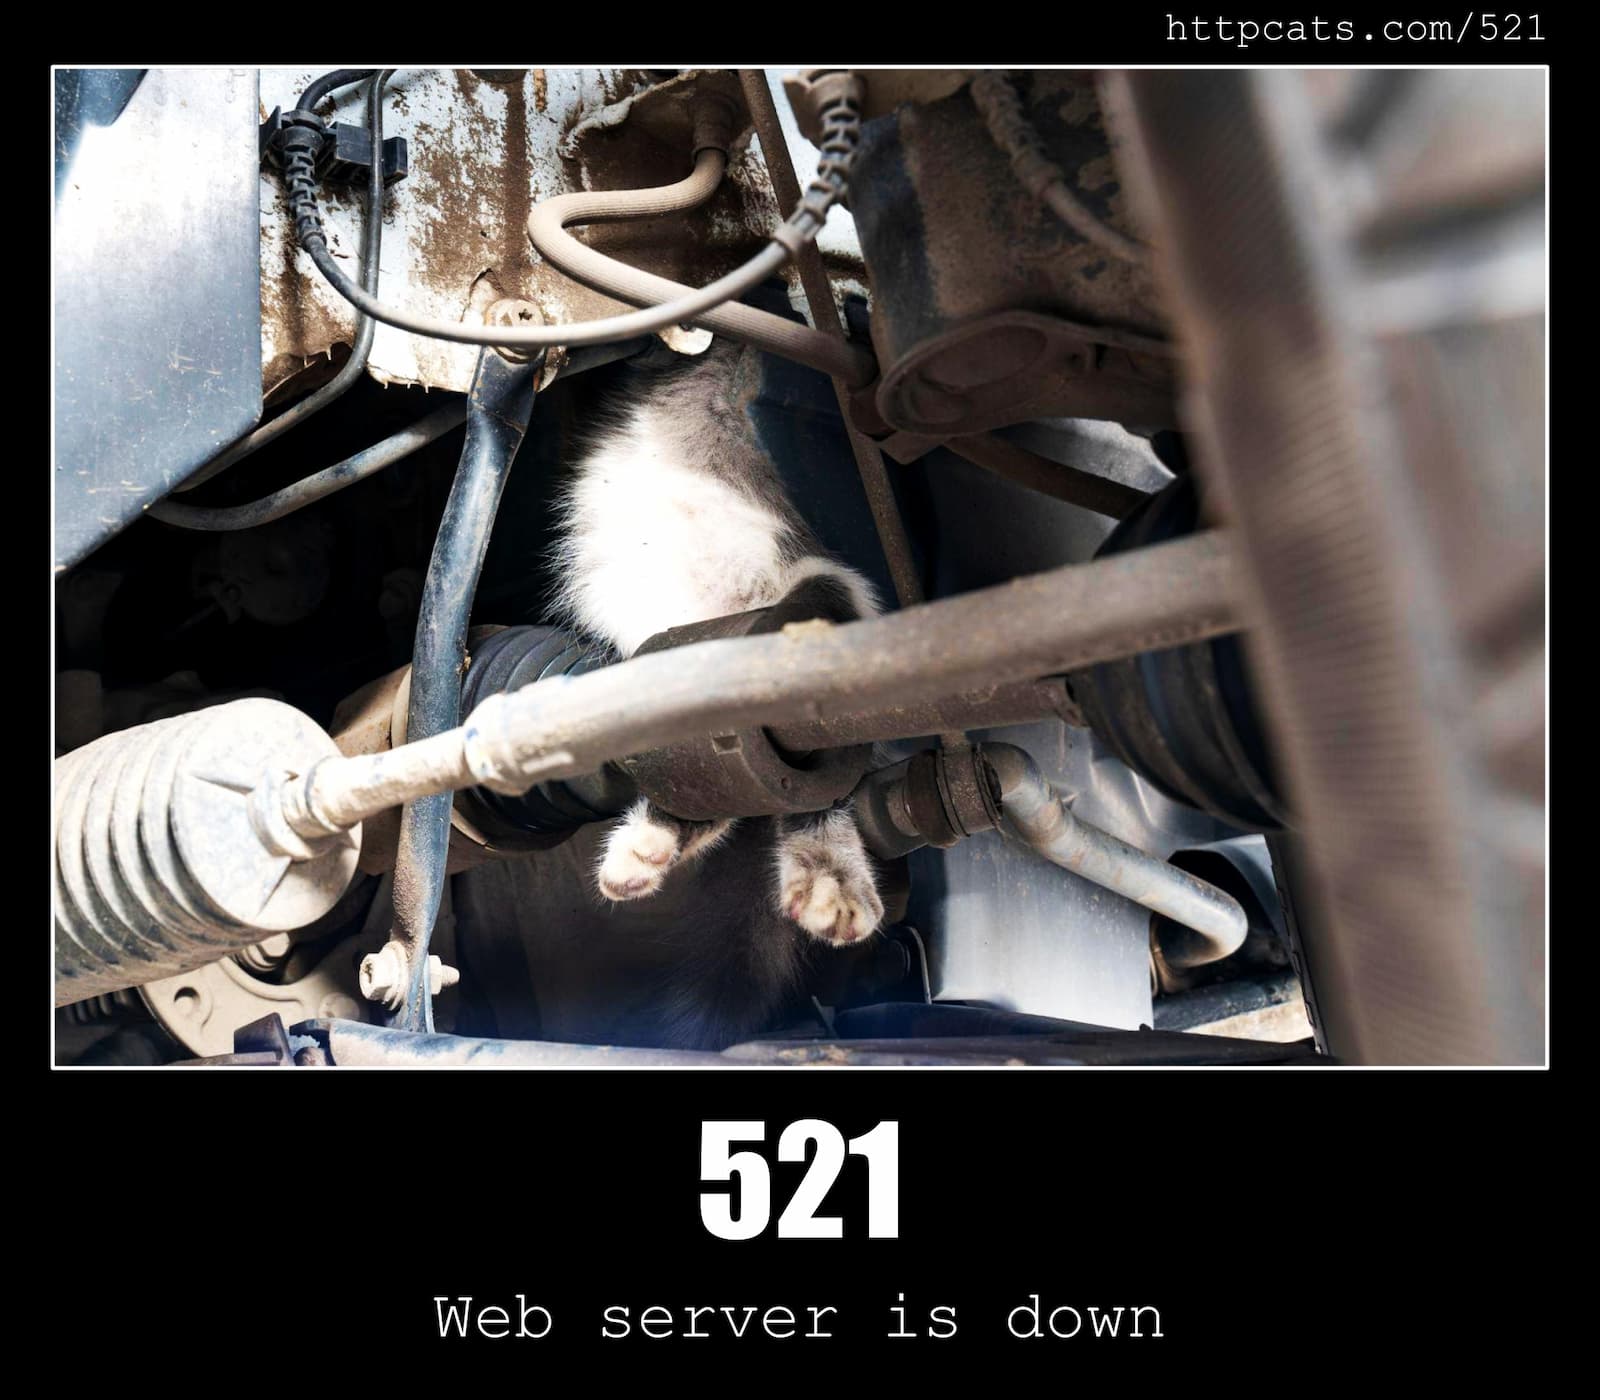 HTTP Status Code 521 Web server is down & Cats